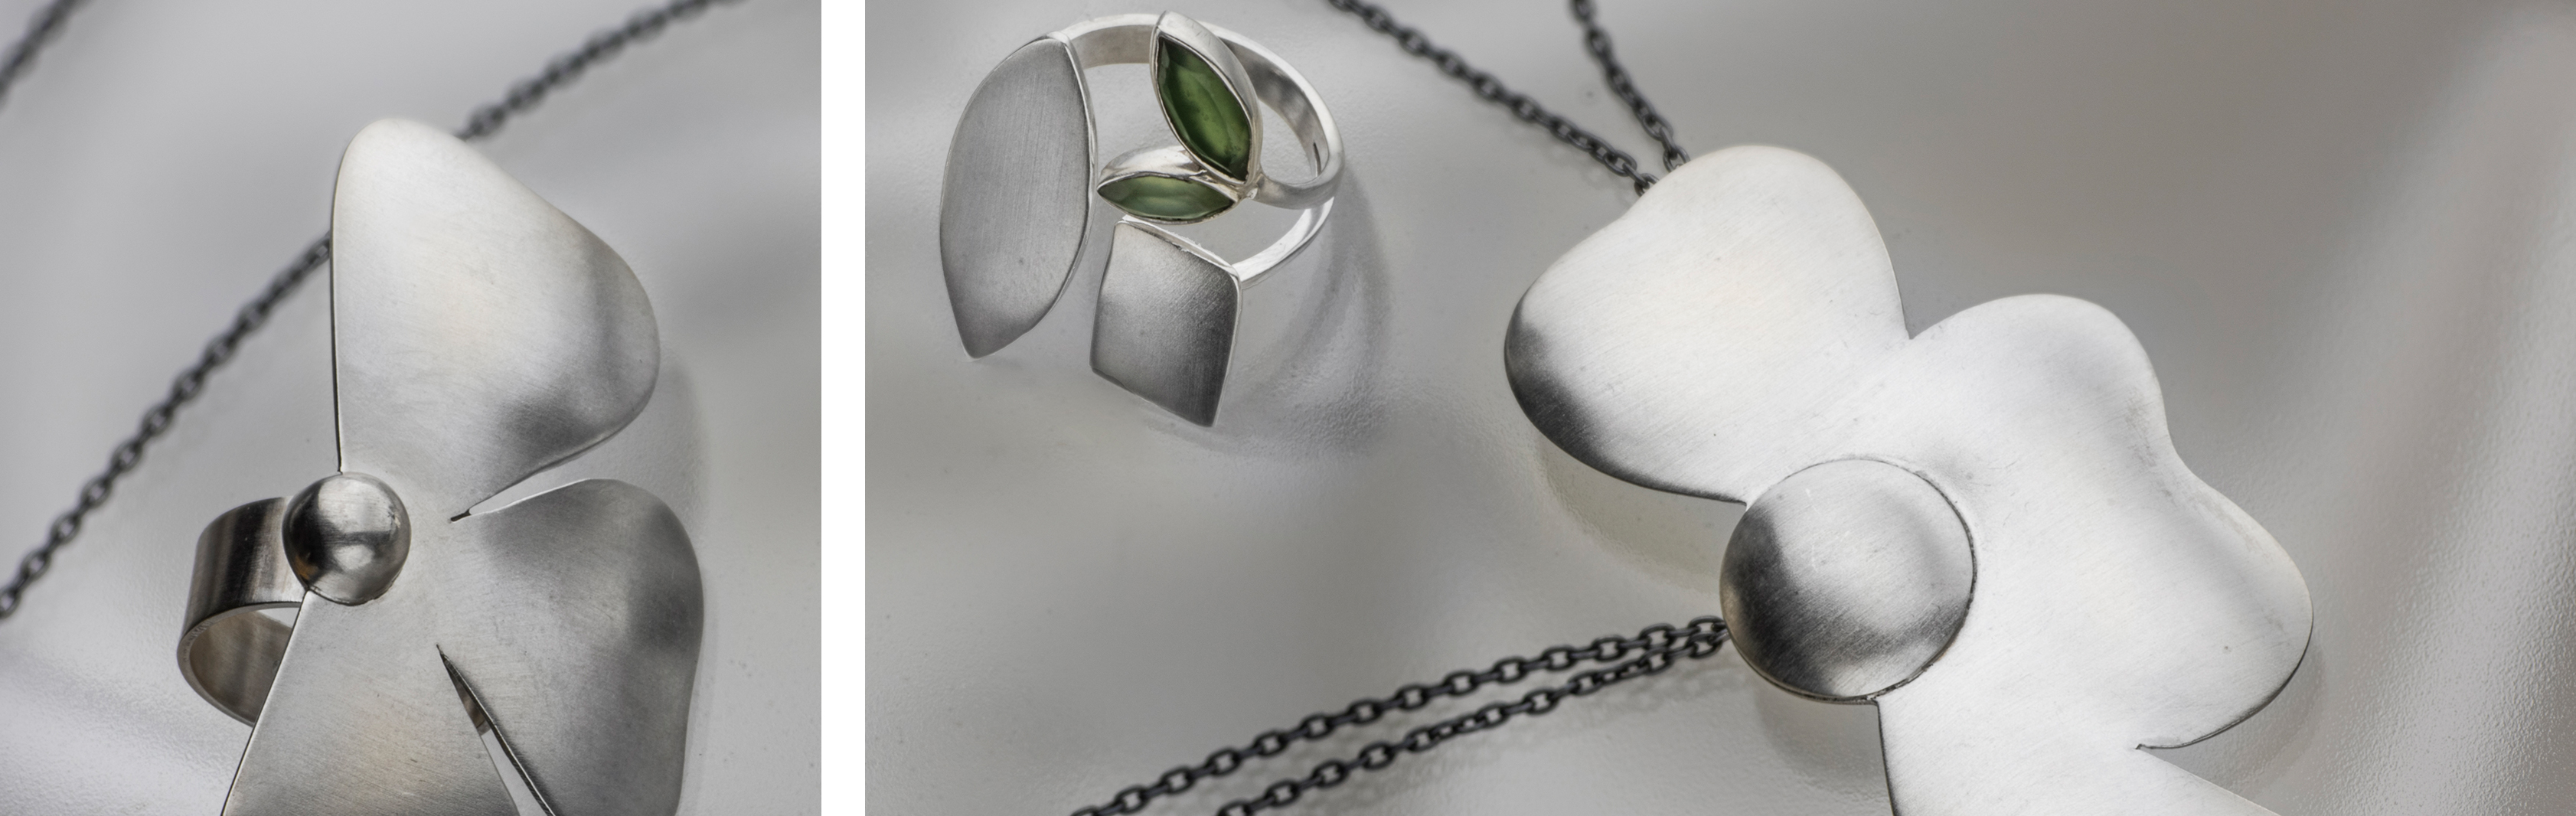 Silver Jewelry, Silver Earrings, Silver Necklace, Silver Bracelet, Bracelets, Necklaces, Jewelry Store, Jewelry, Online Jewelry, Gras Jewelry, Israeli Jewelry, Flower Ring, Semi-Open Ring, Bypass Ring, Flower Necklace, Asymmetrical Jewelry, Jewelry for Wo